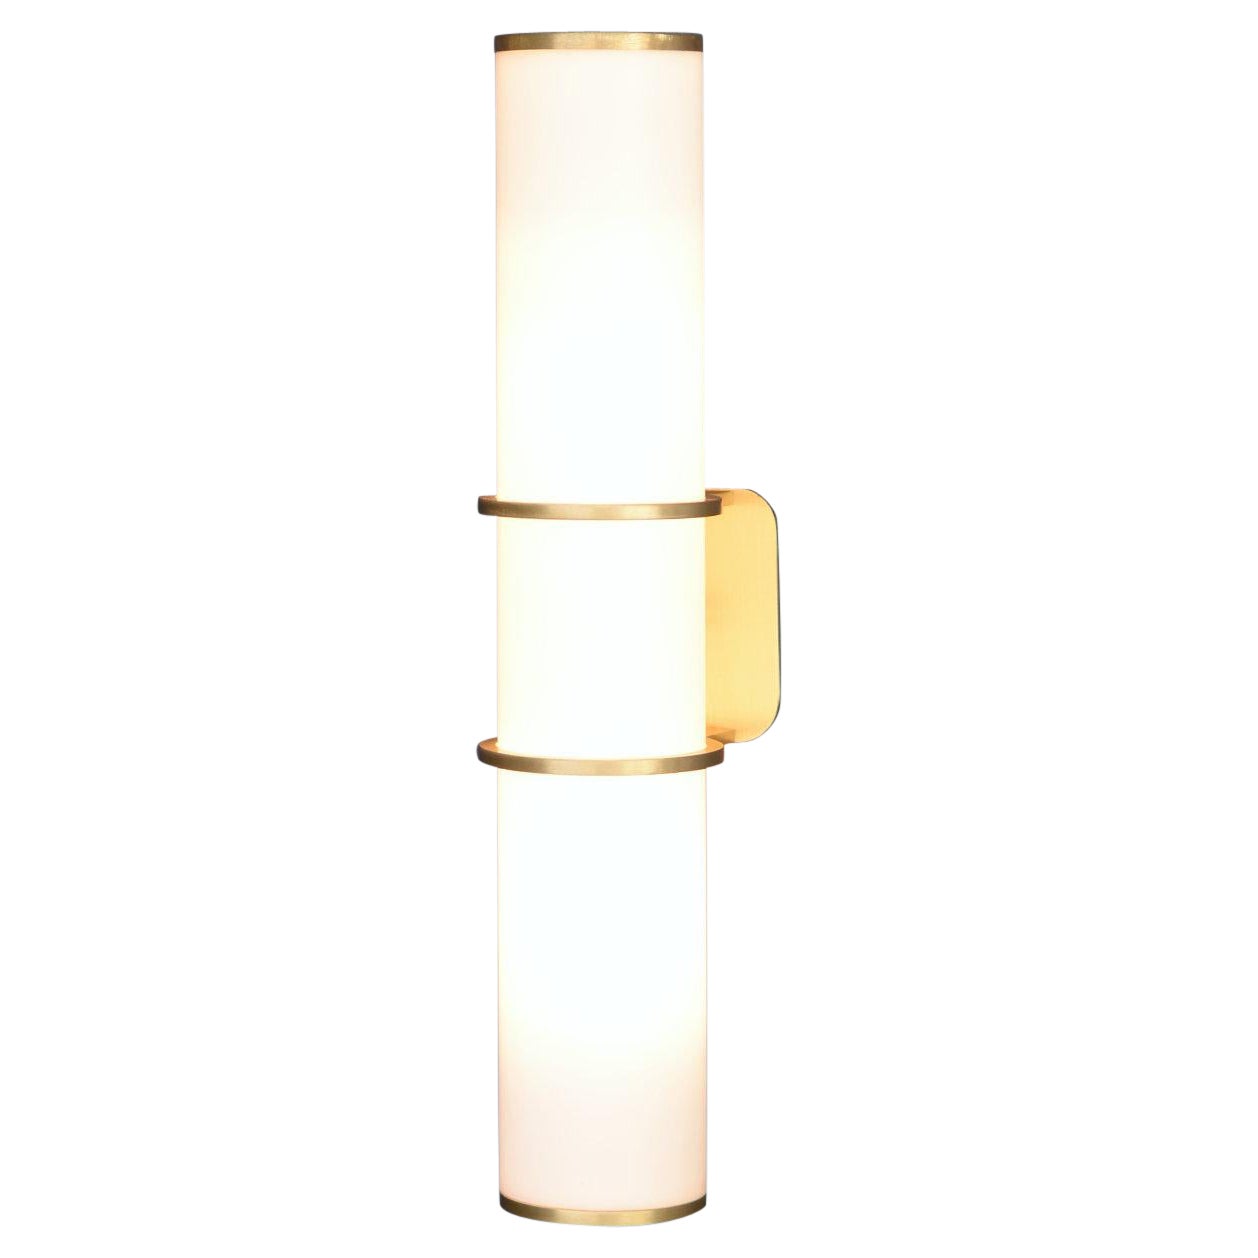 LUCERNA Modern Wall Light in Brushed Brass, IP44 Rated, Made in Britain For Sale